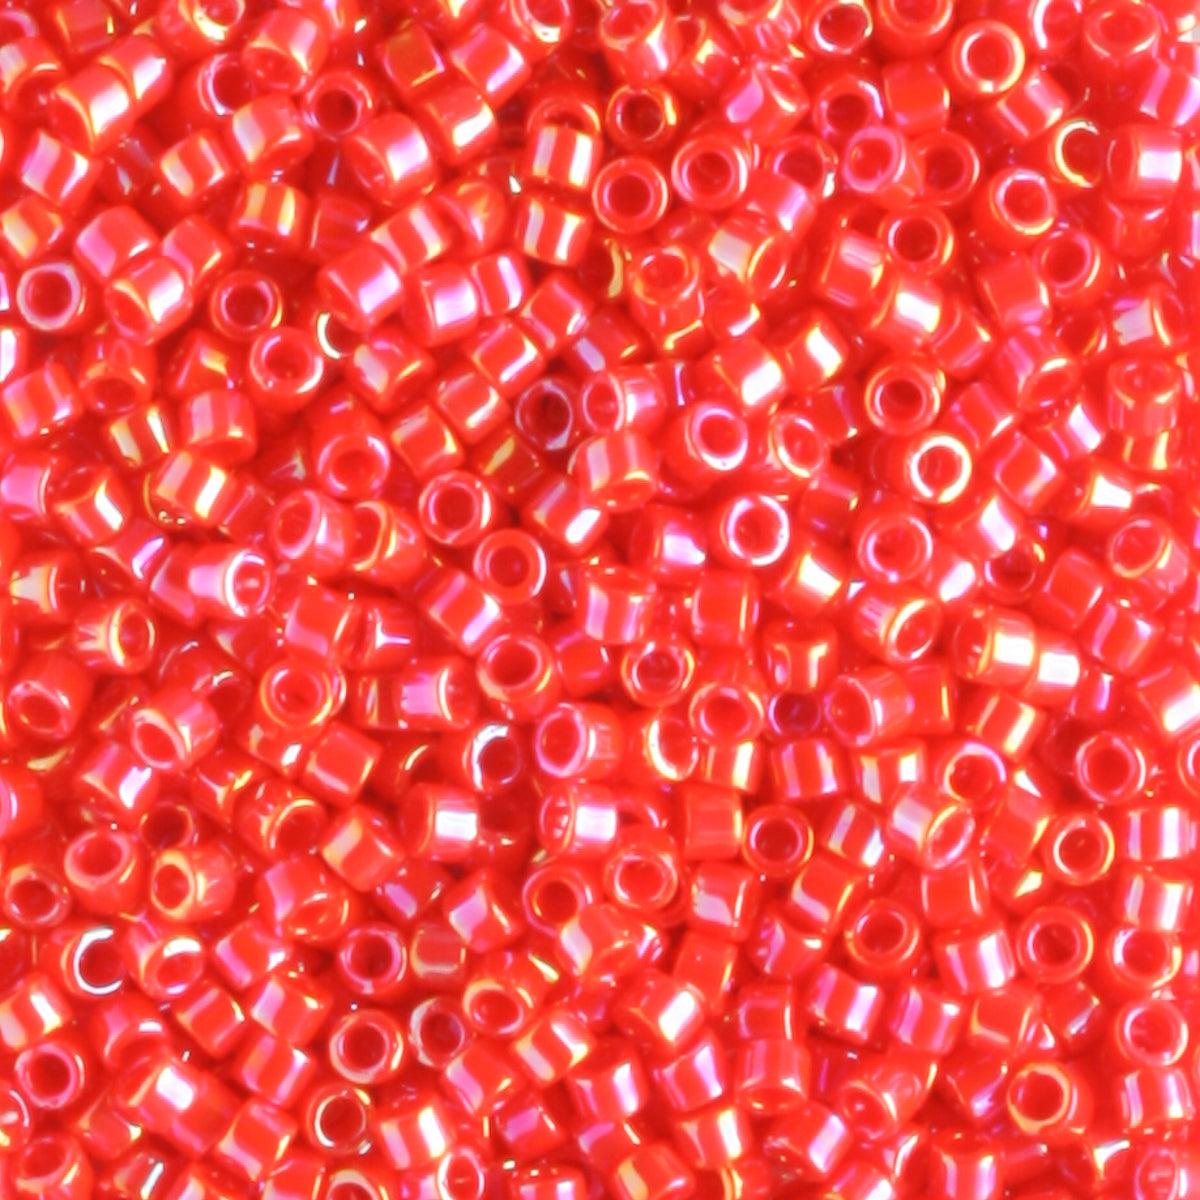 DB0159 Opaque Rainbow Red - 5 grams